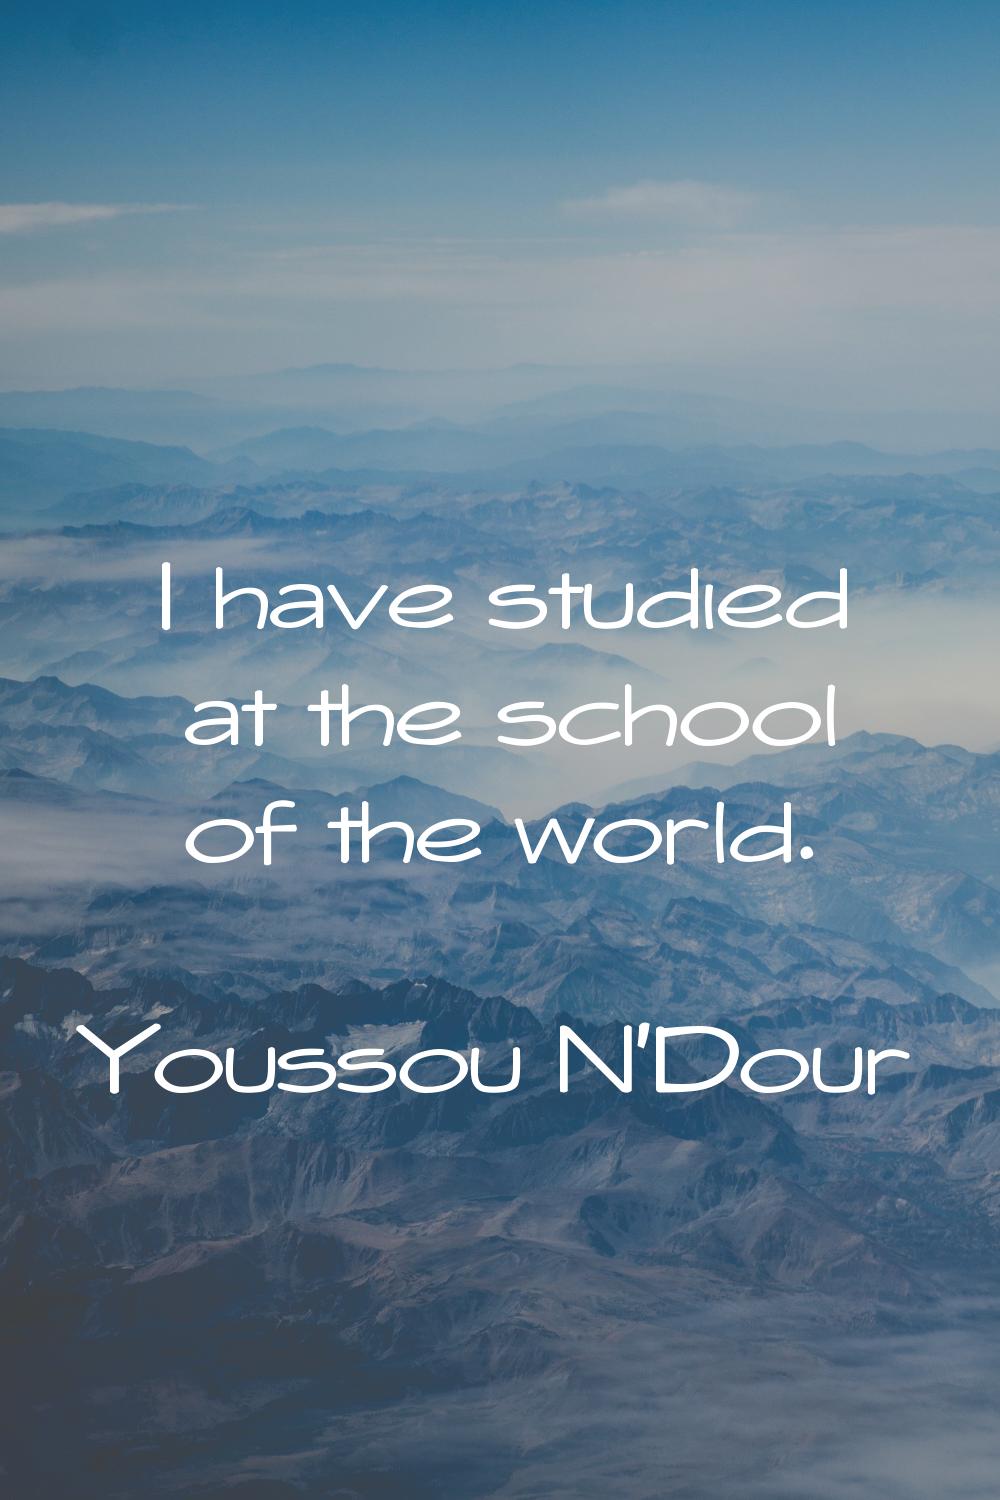 I have studied at the school of the world.